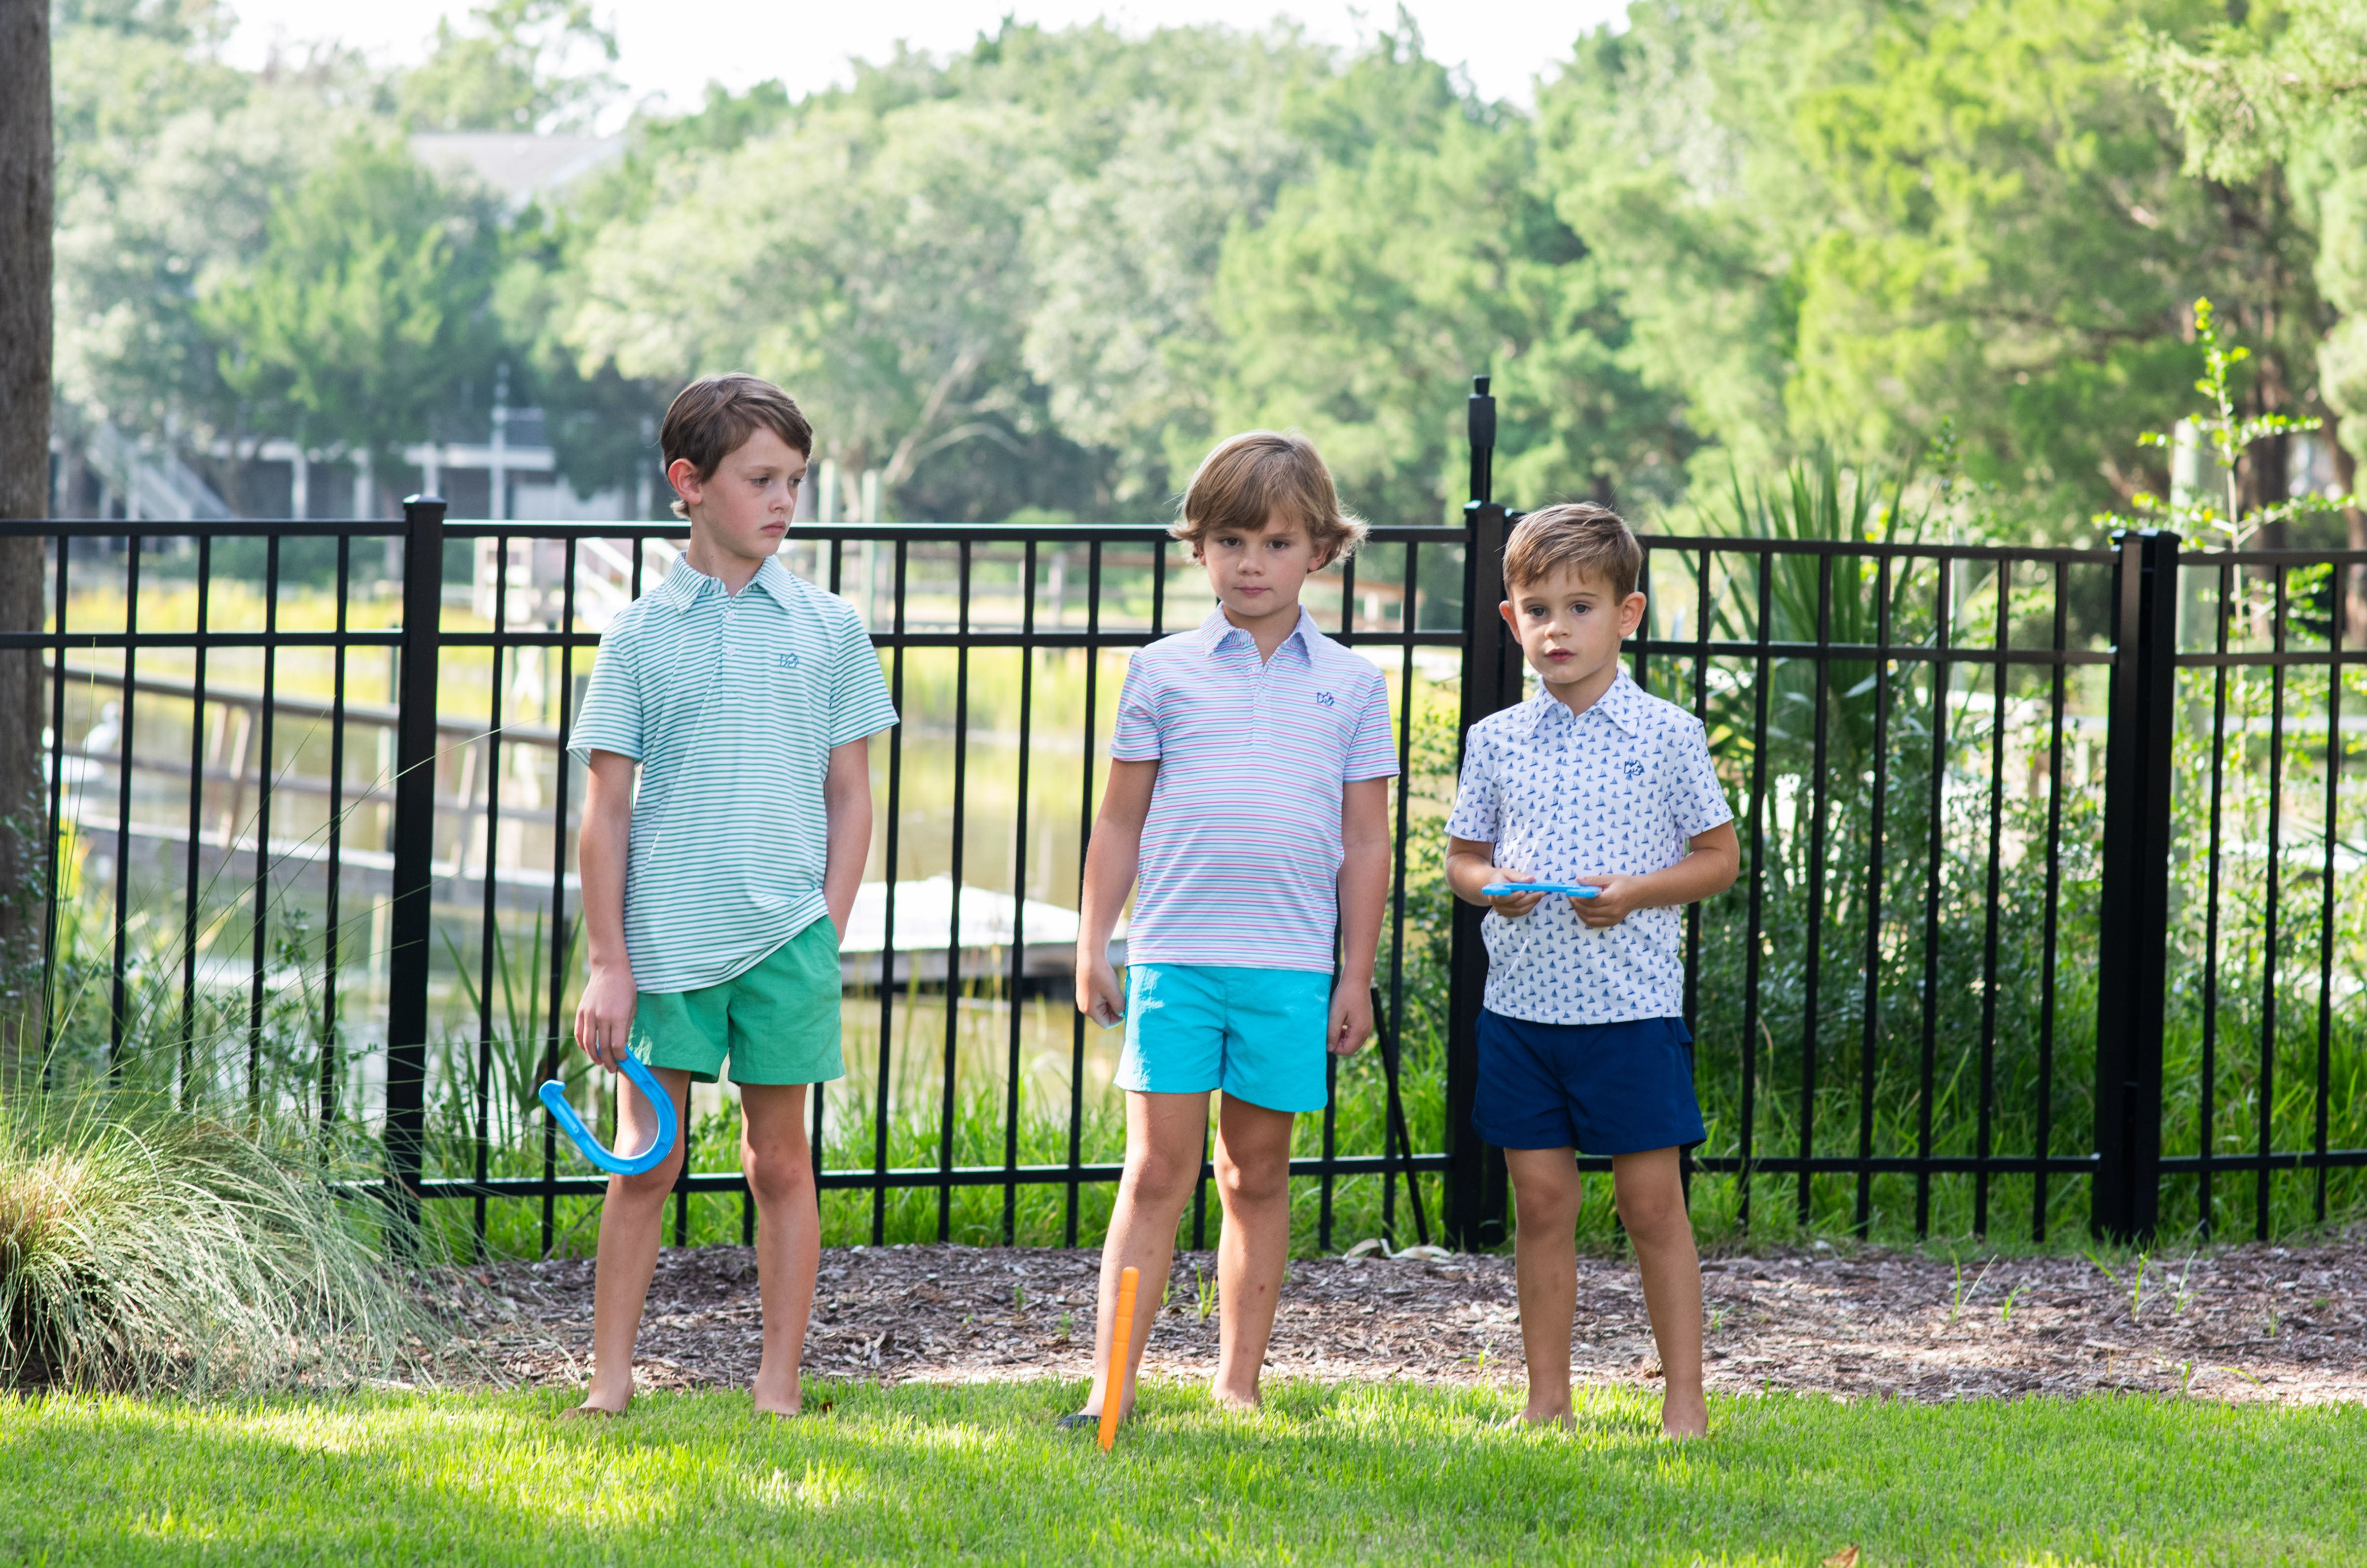 Founders Kids Fishing Shirt Sunset Vibes – Ragamuffin Children's Boutique